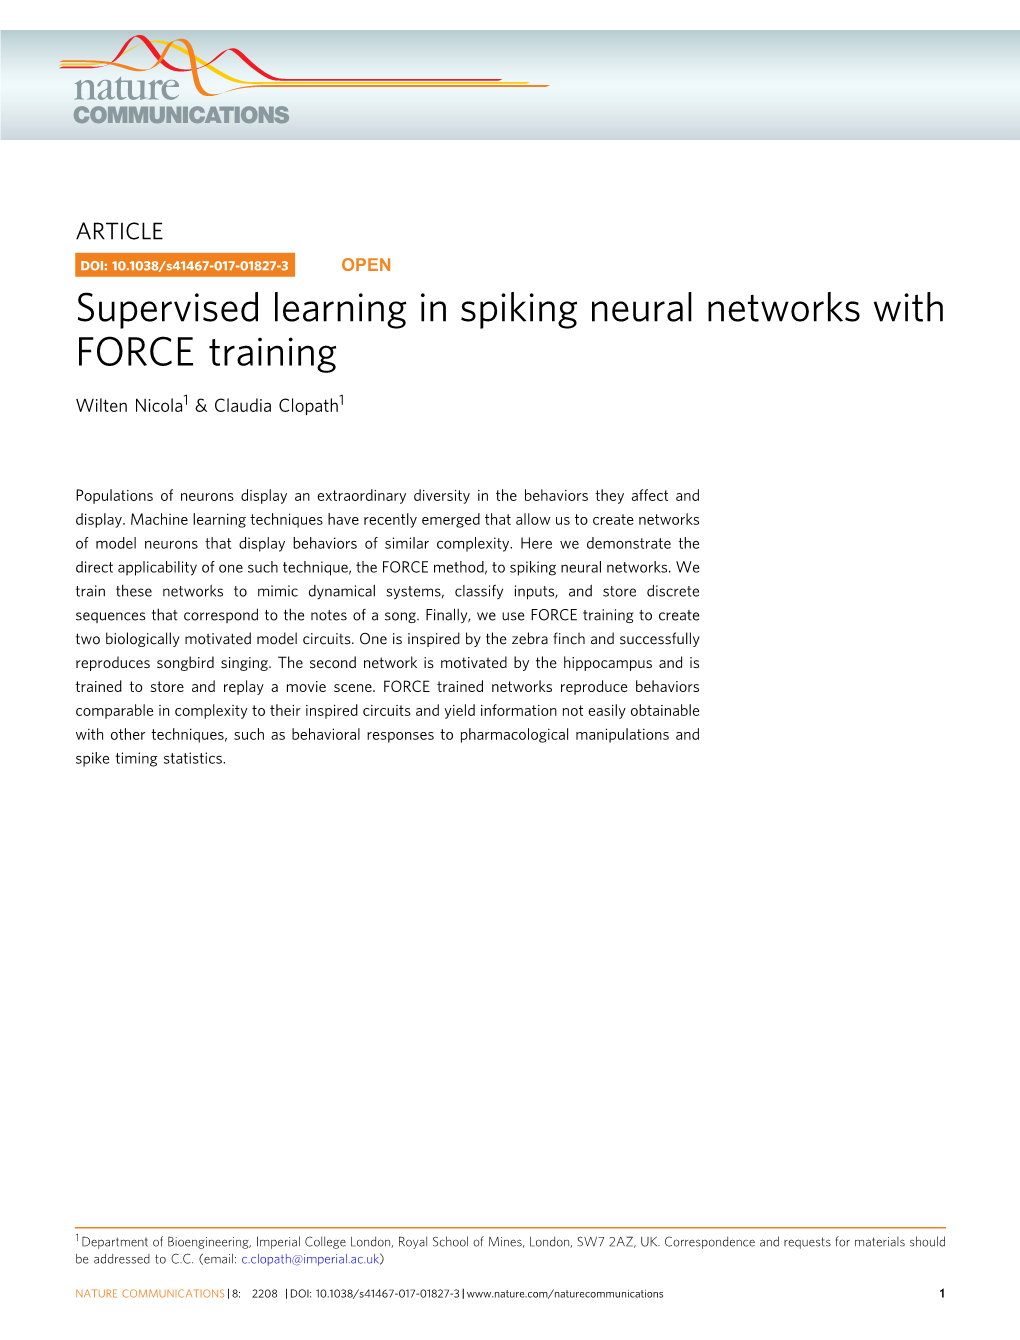 Supervised Learning in Spiking Neural Networks with FORCE Training